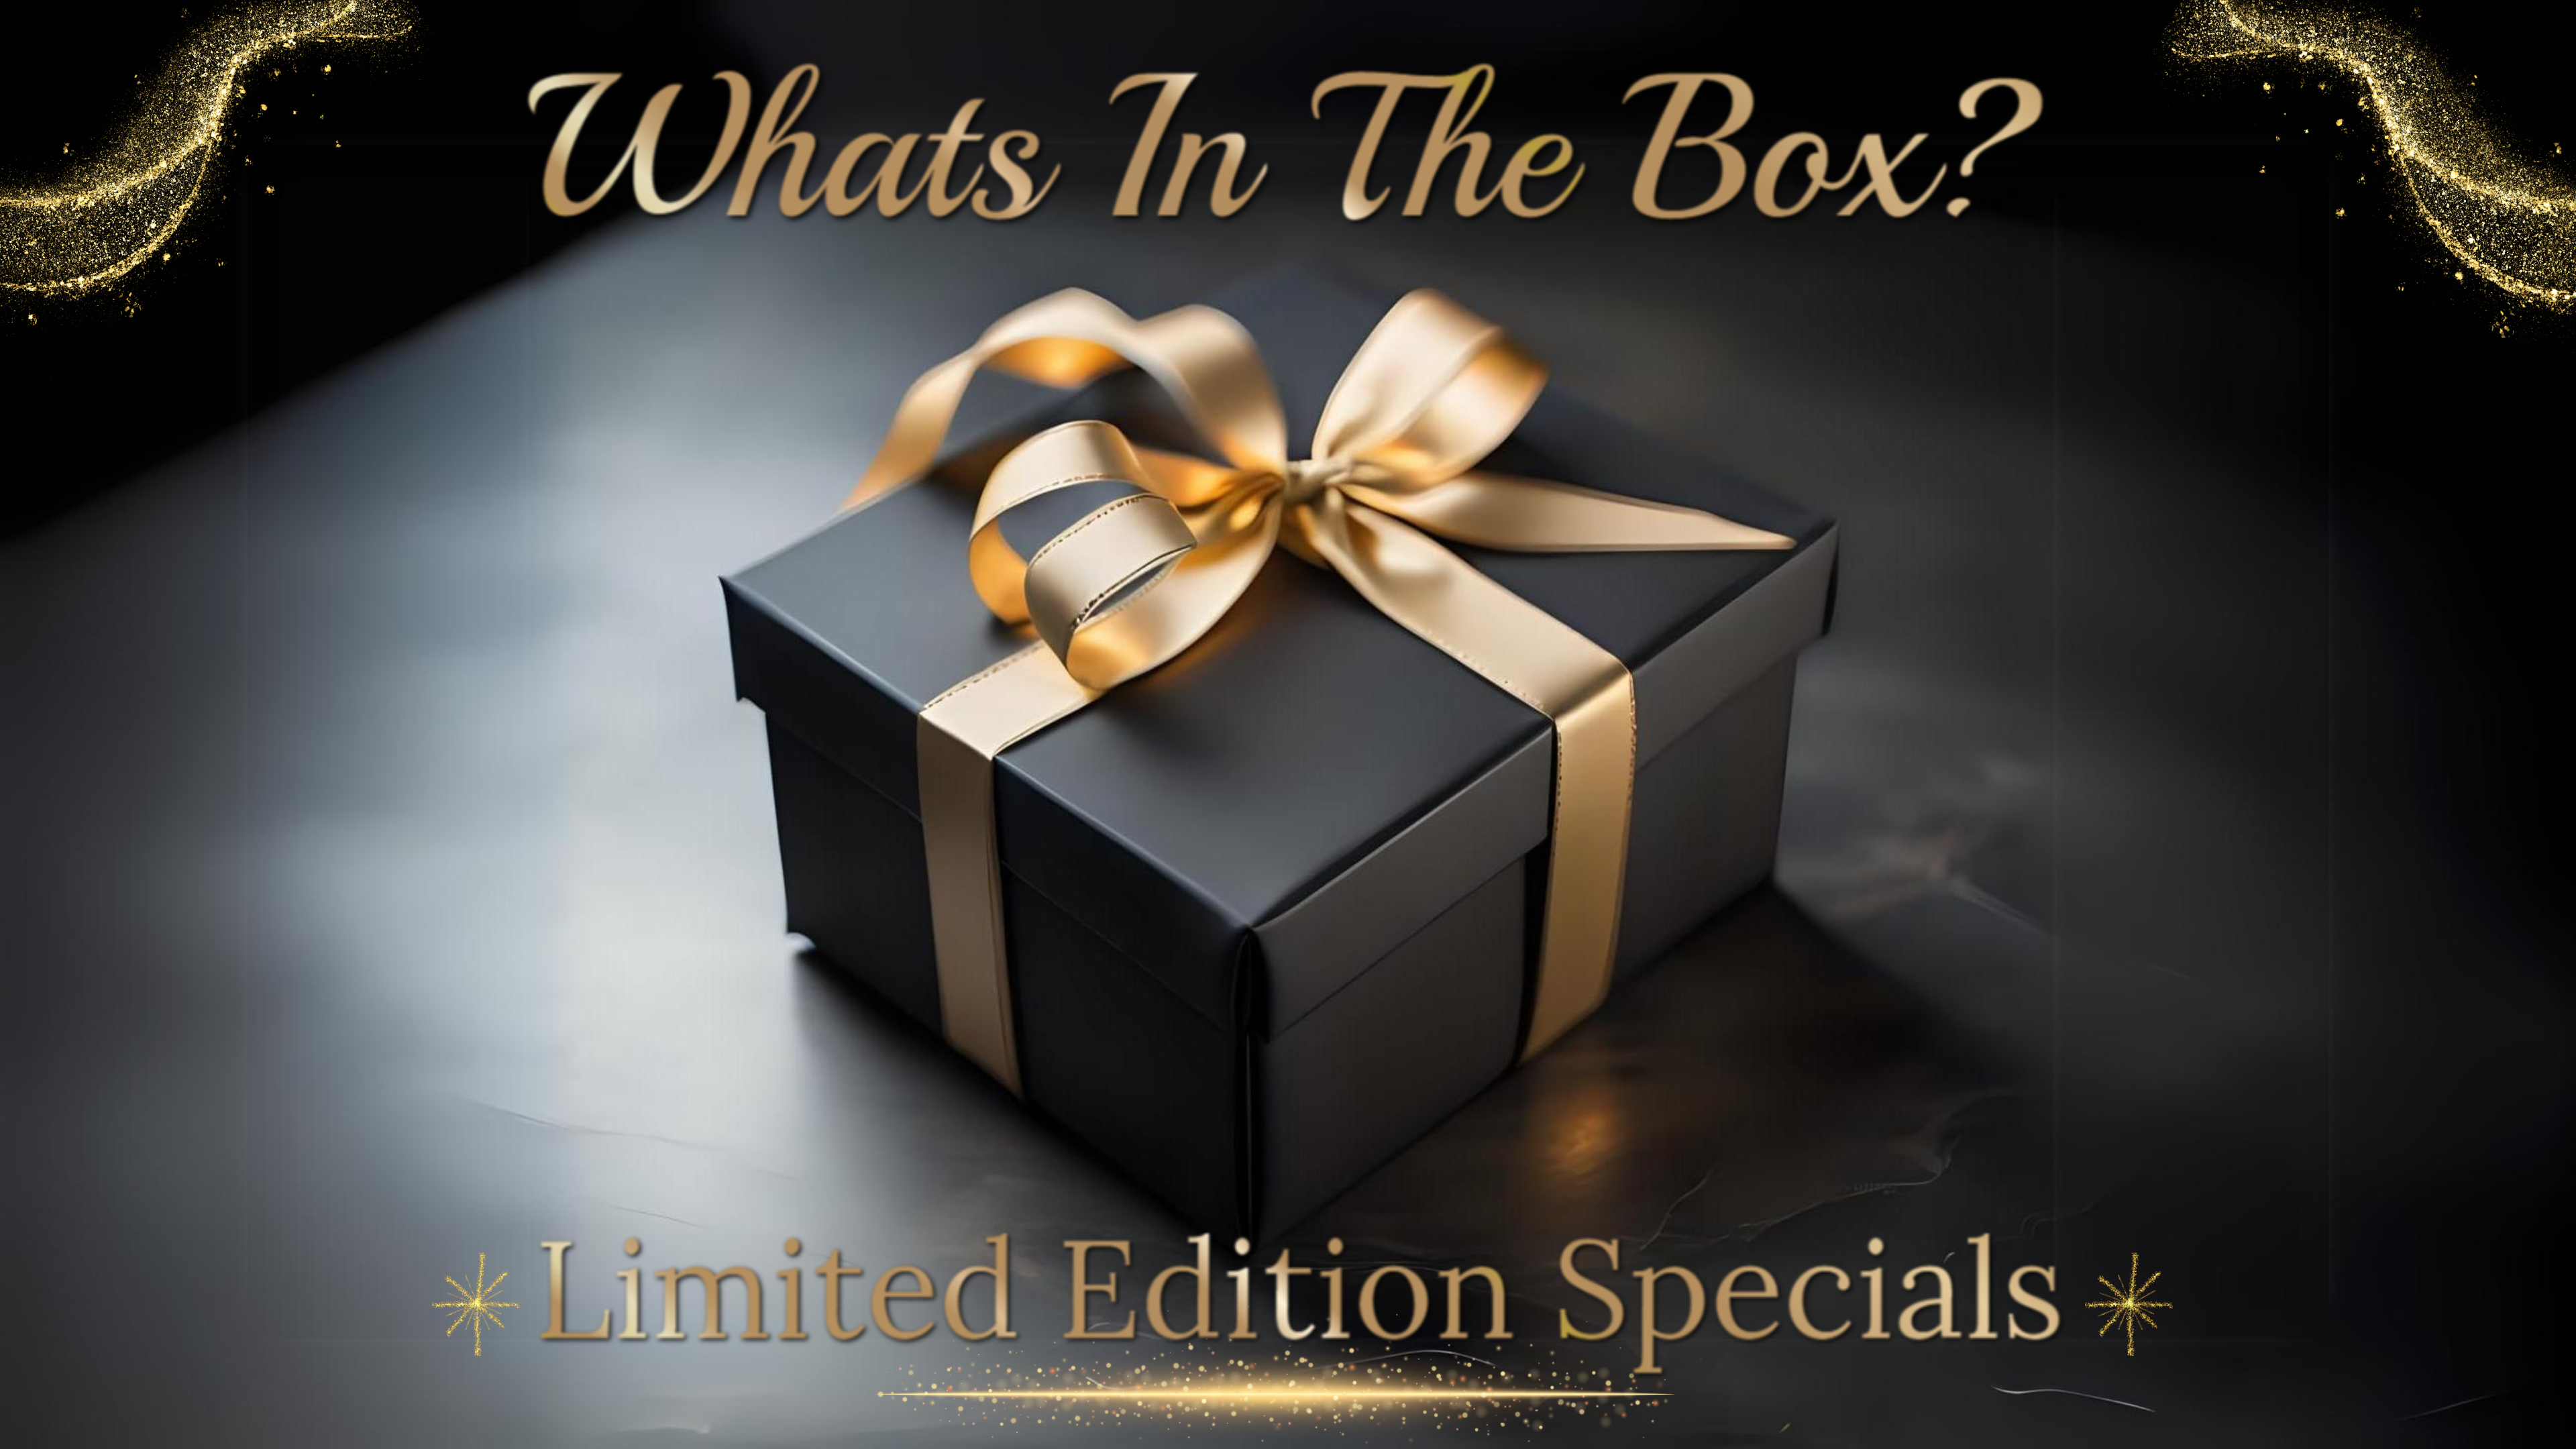 Black box specials - Defined Hospitality Solutions